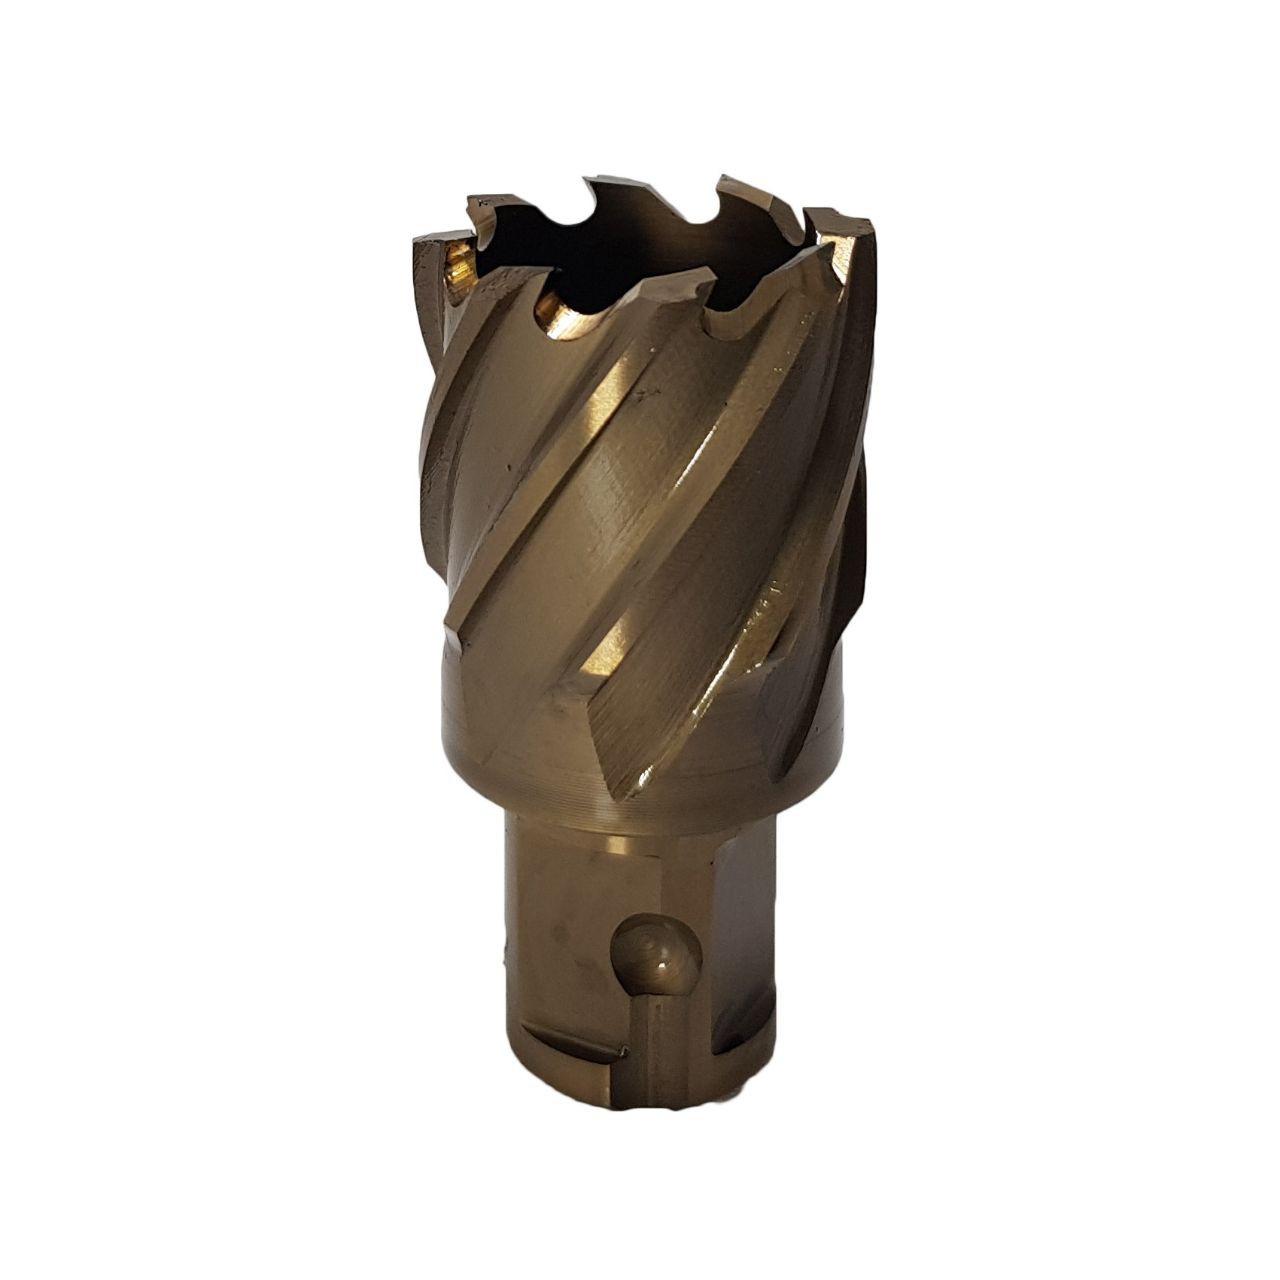 29 X 30 HSS-Co Excision Core Drill